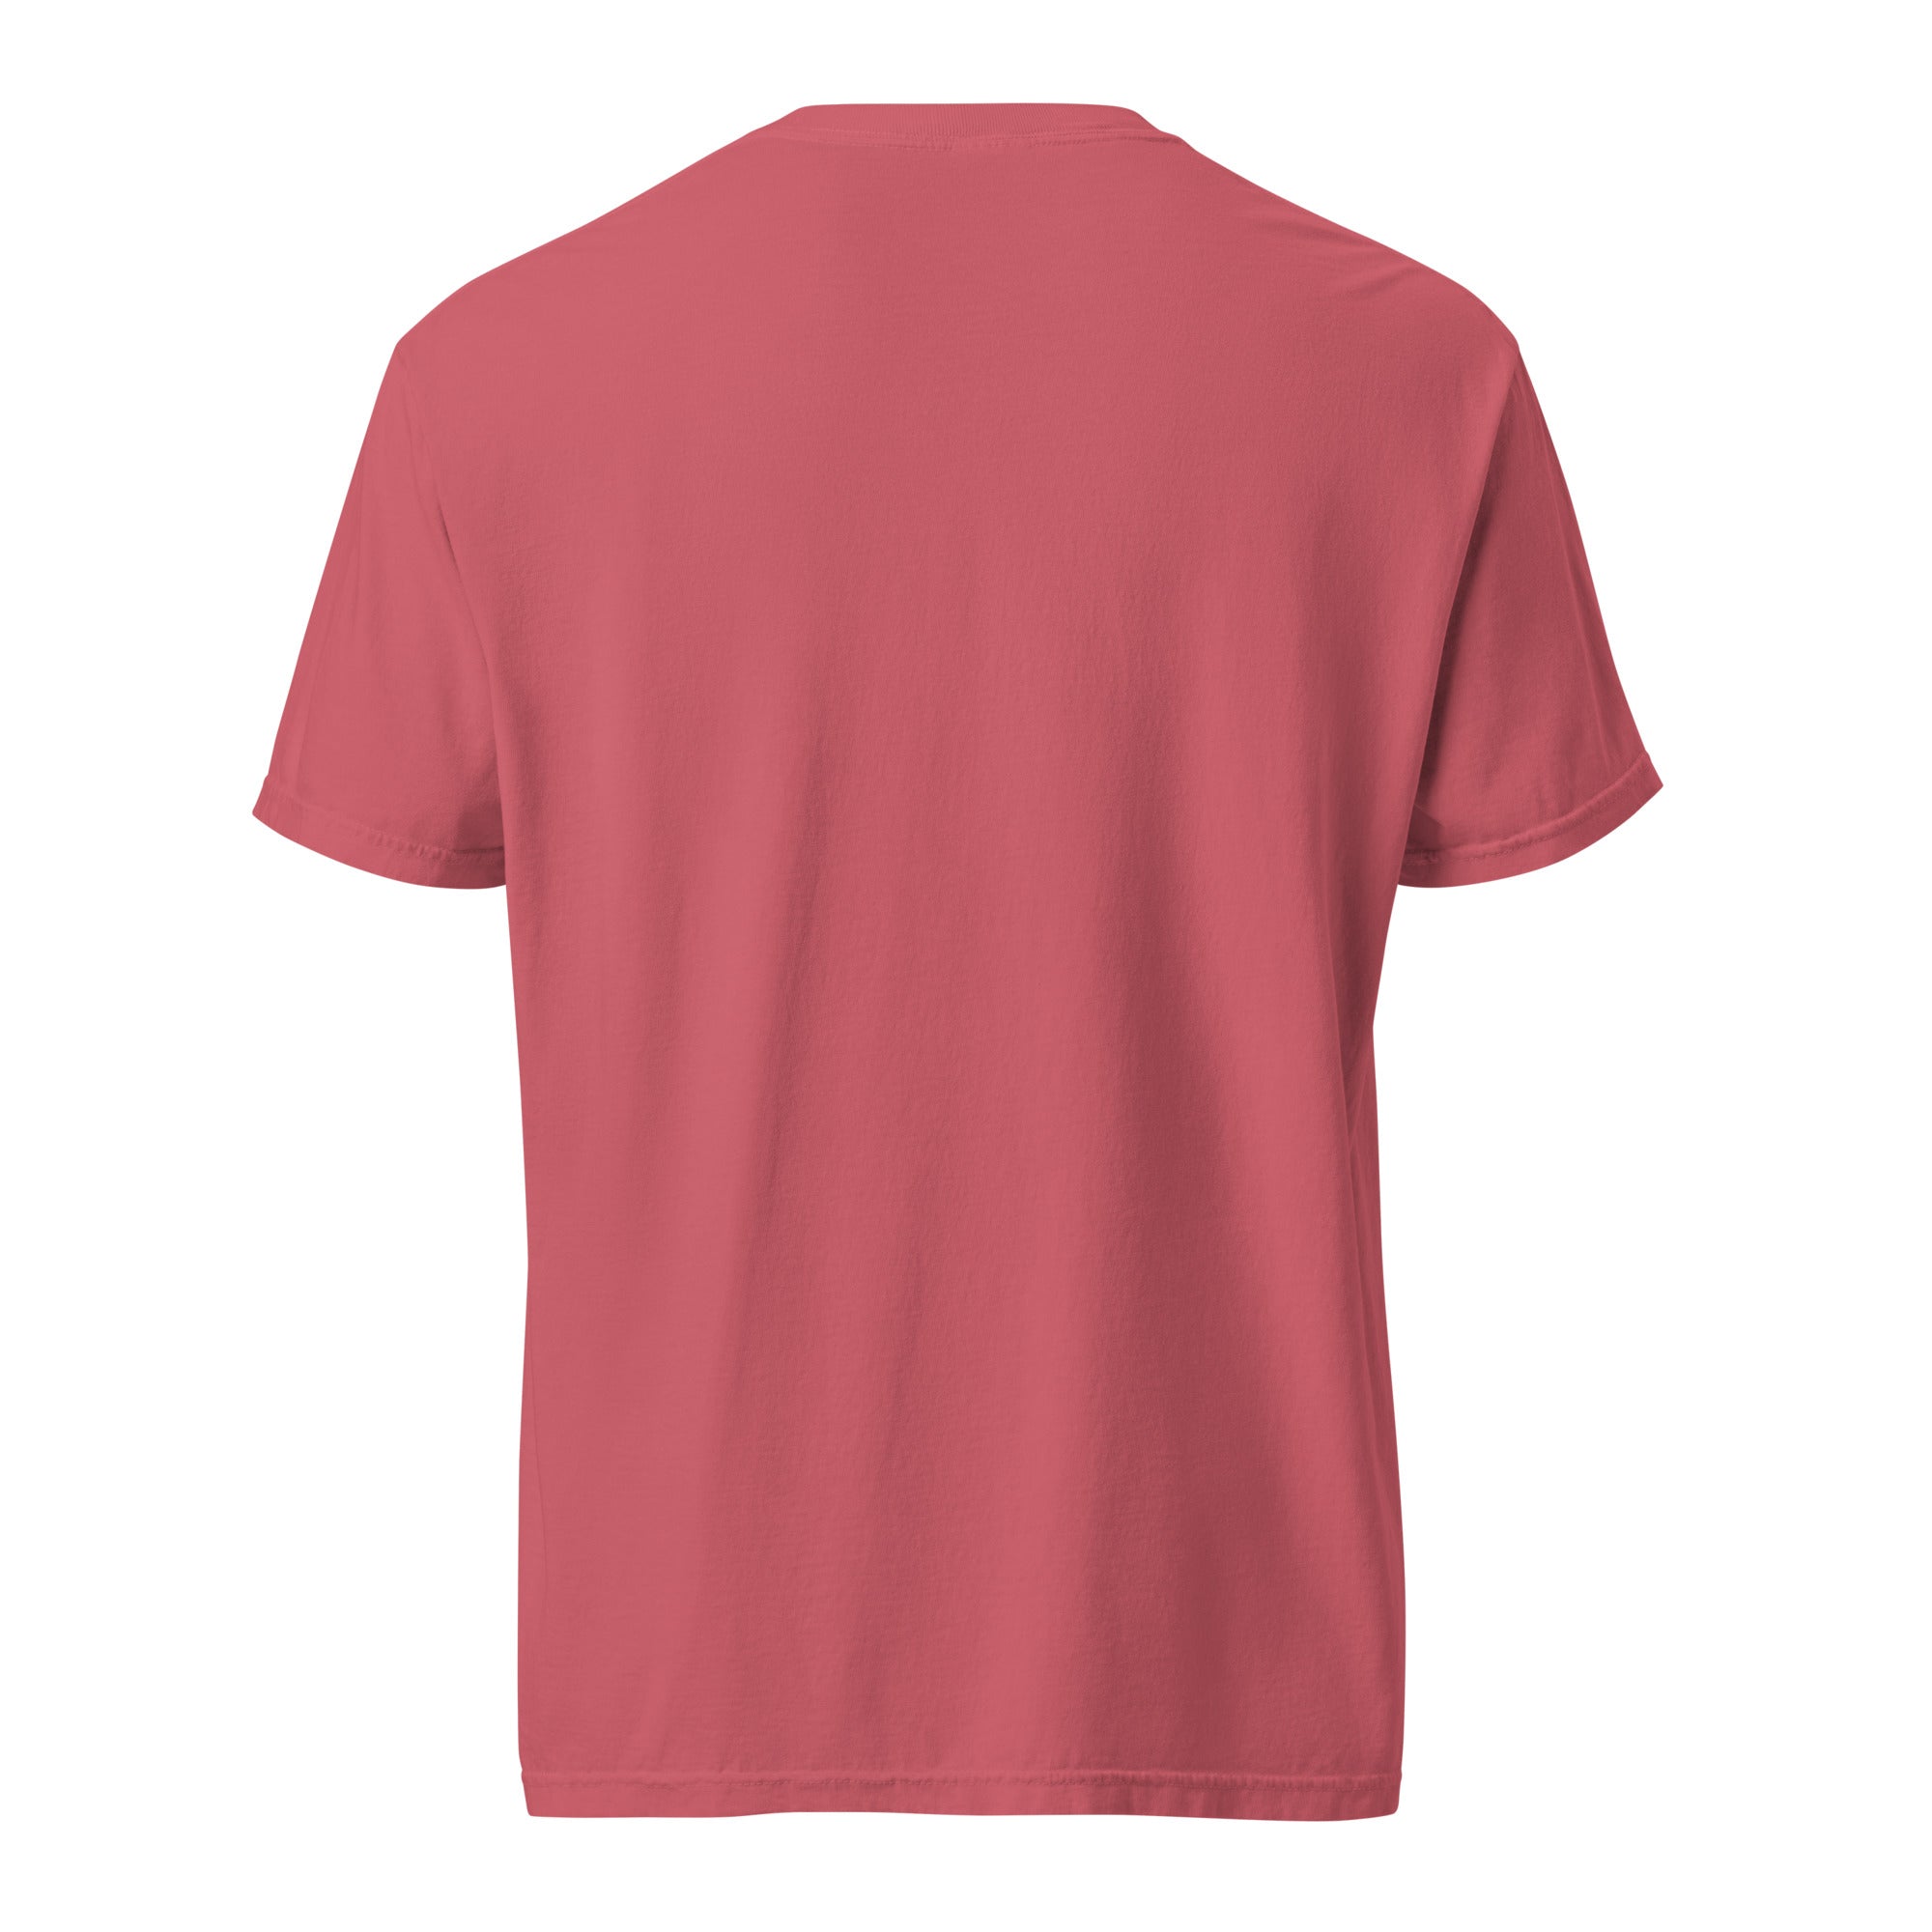 10 Year Anniversary Summer Collection Comfort Colors Tee - Red - SOARescue